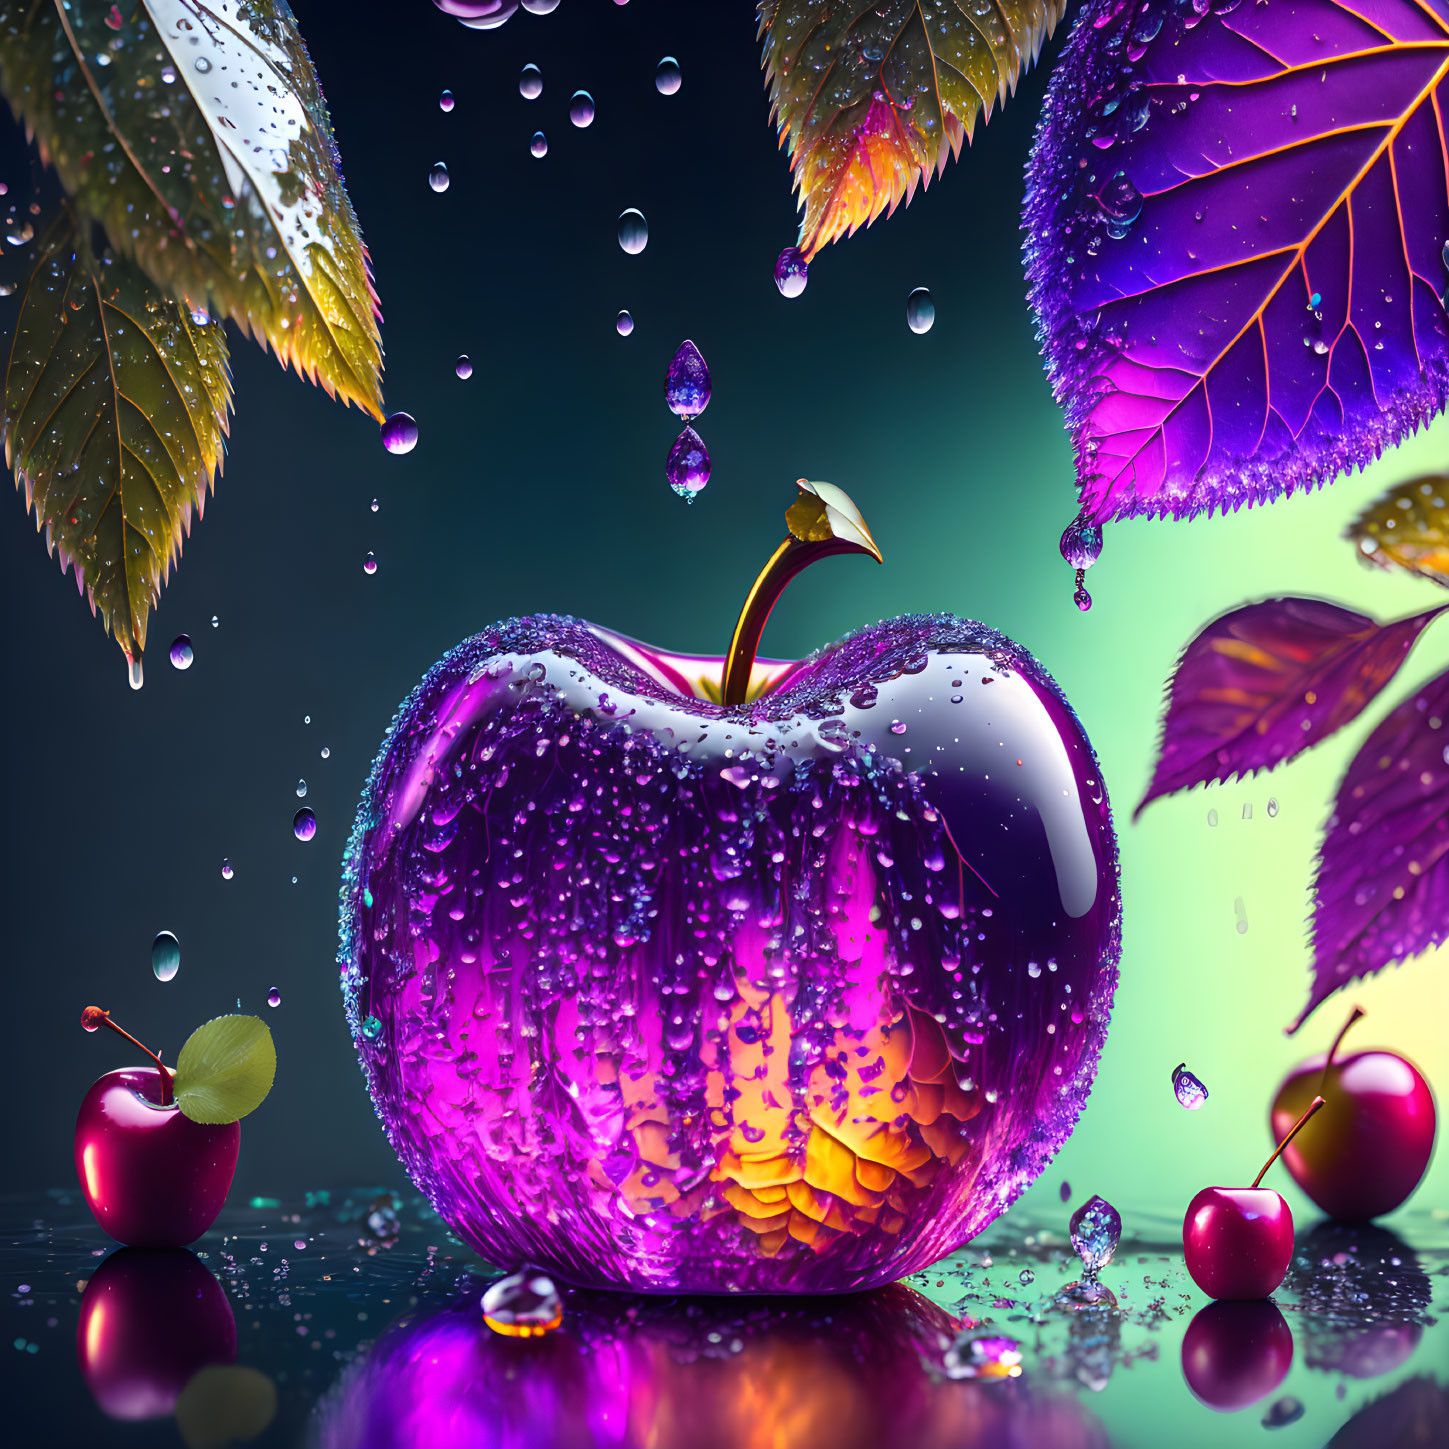 Vibrant purple apple with water droplets, surrounded by smaller apples and colorful leaves on teal background